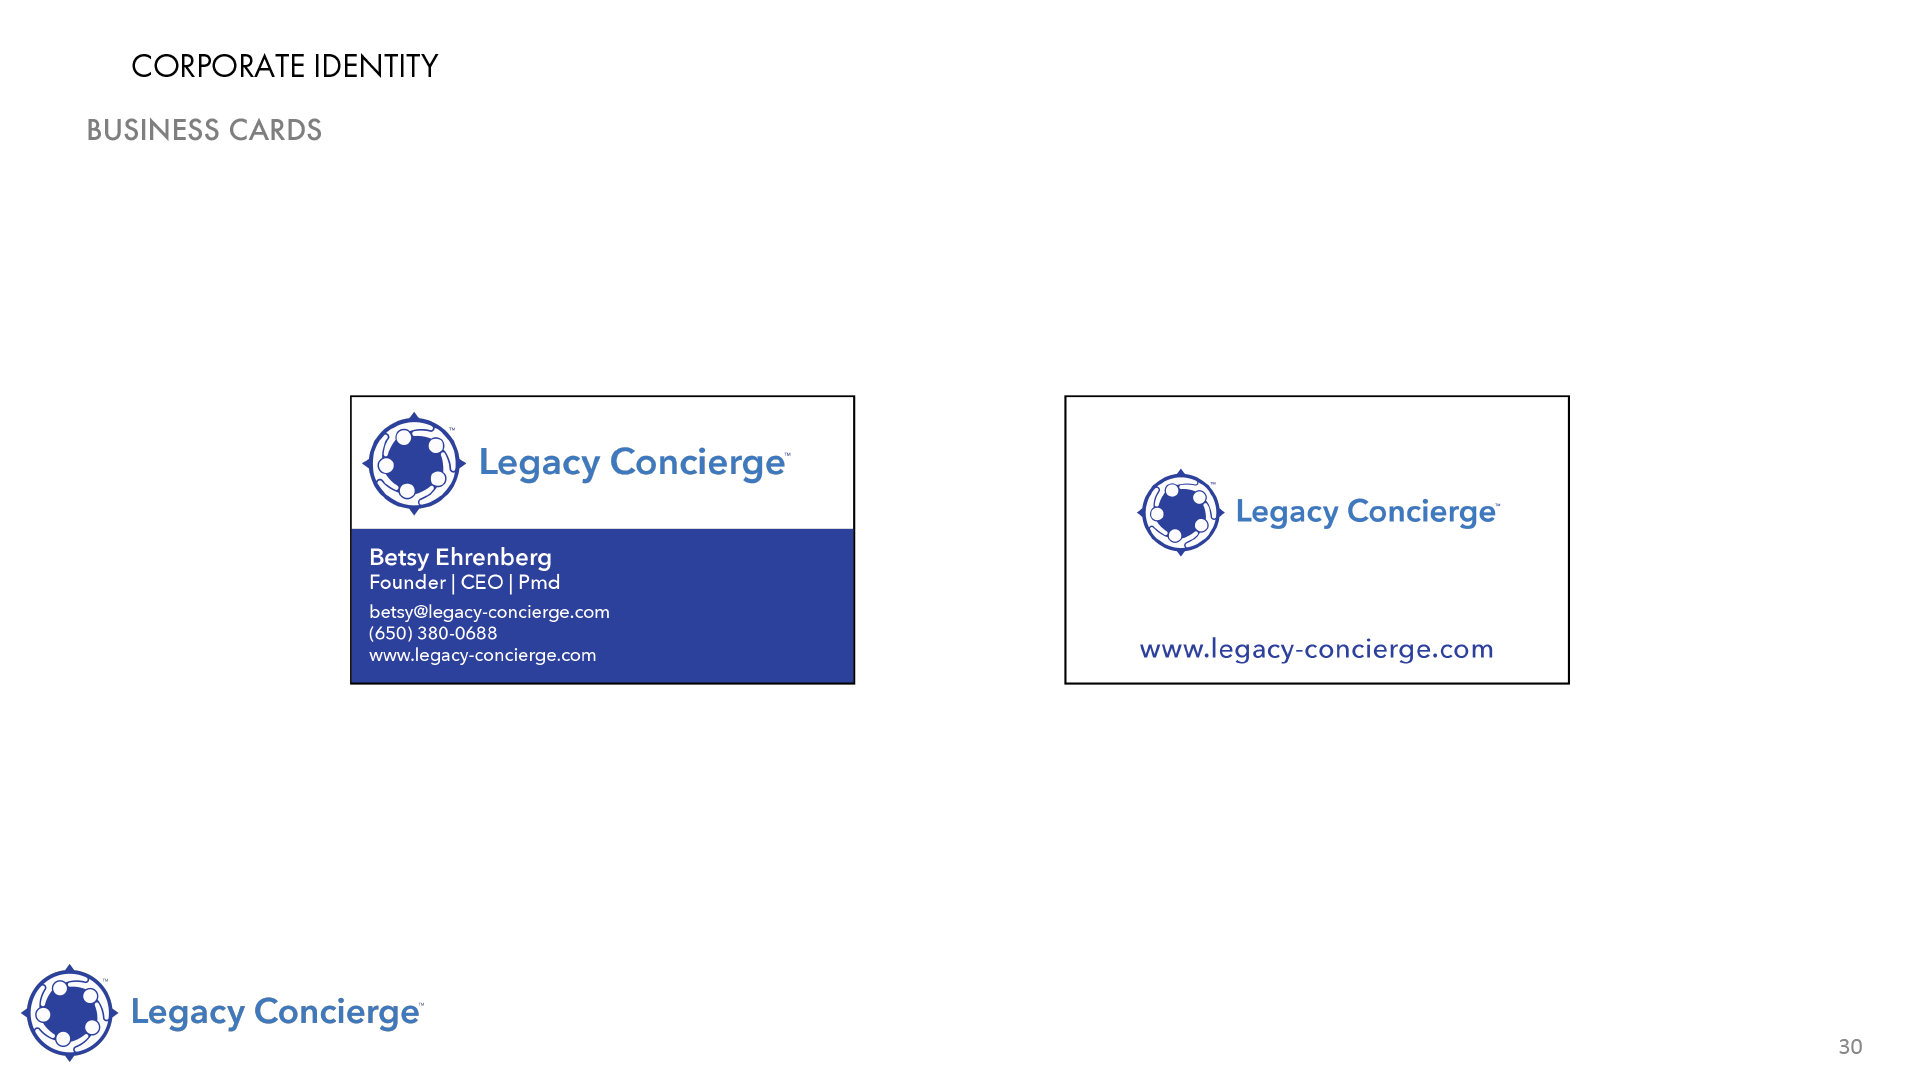 LEGACY_CONCIERGE_STYLEGUIDE-30.png